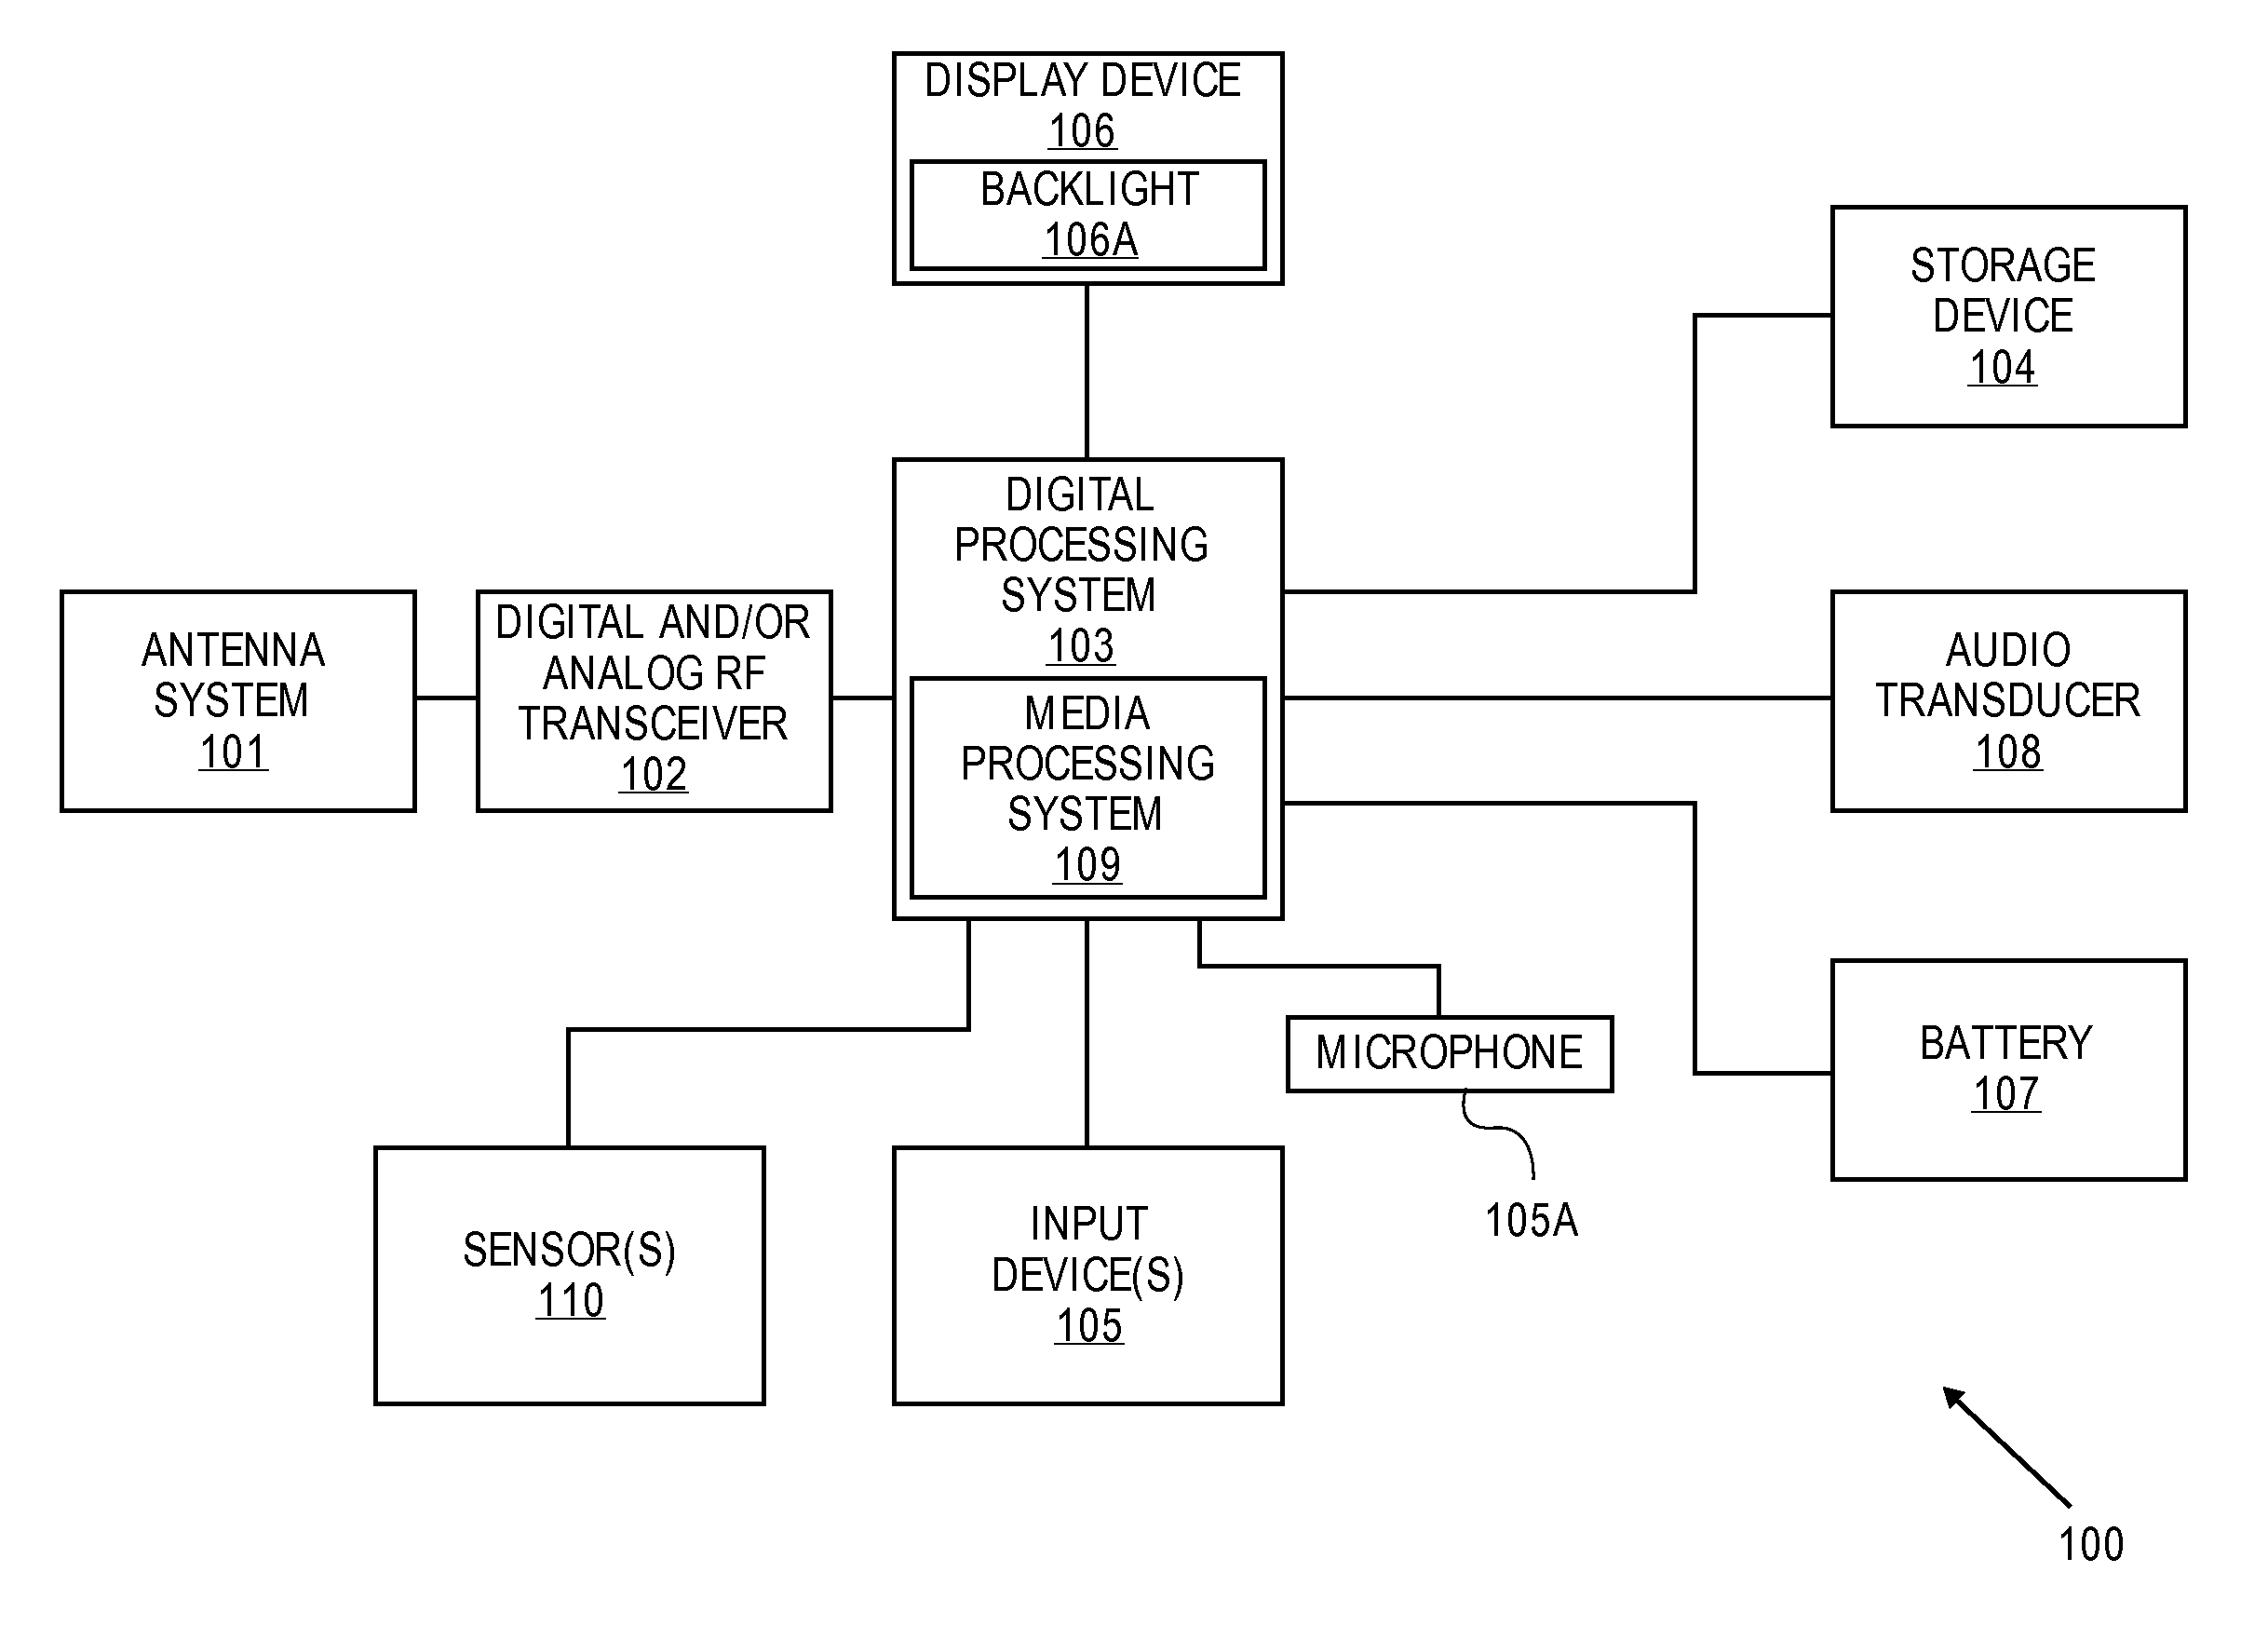 Dynamic routing of audio among multiple audio devices